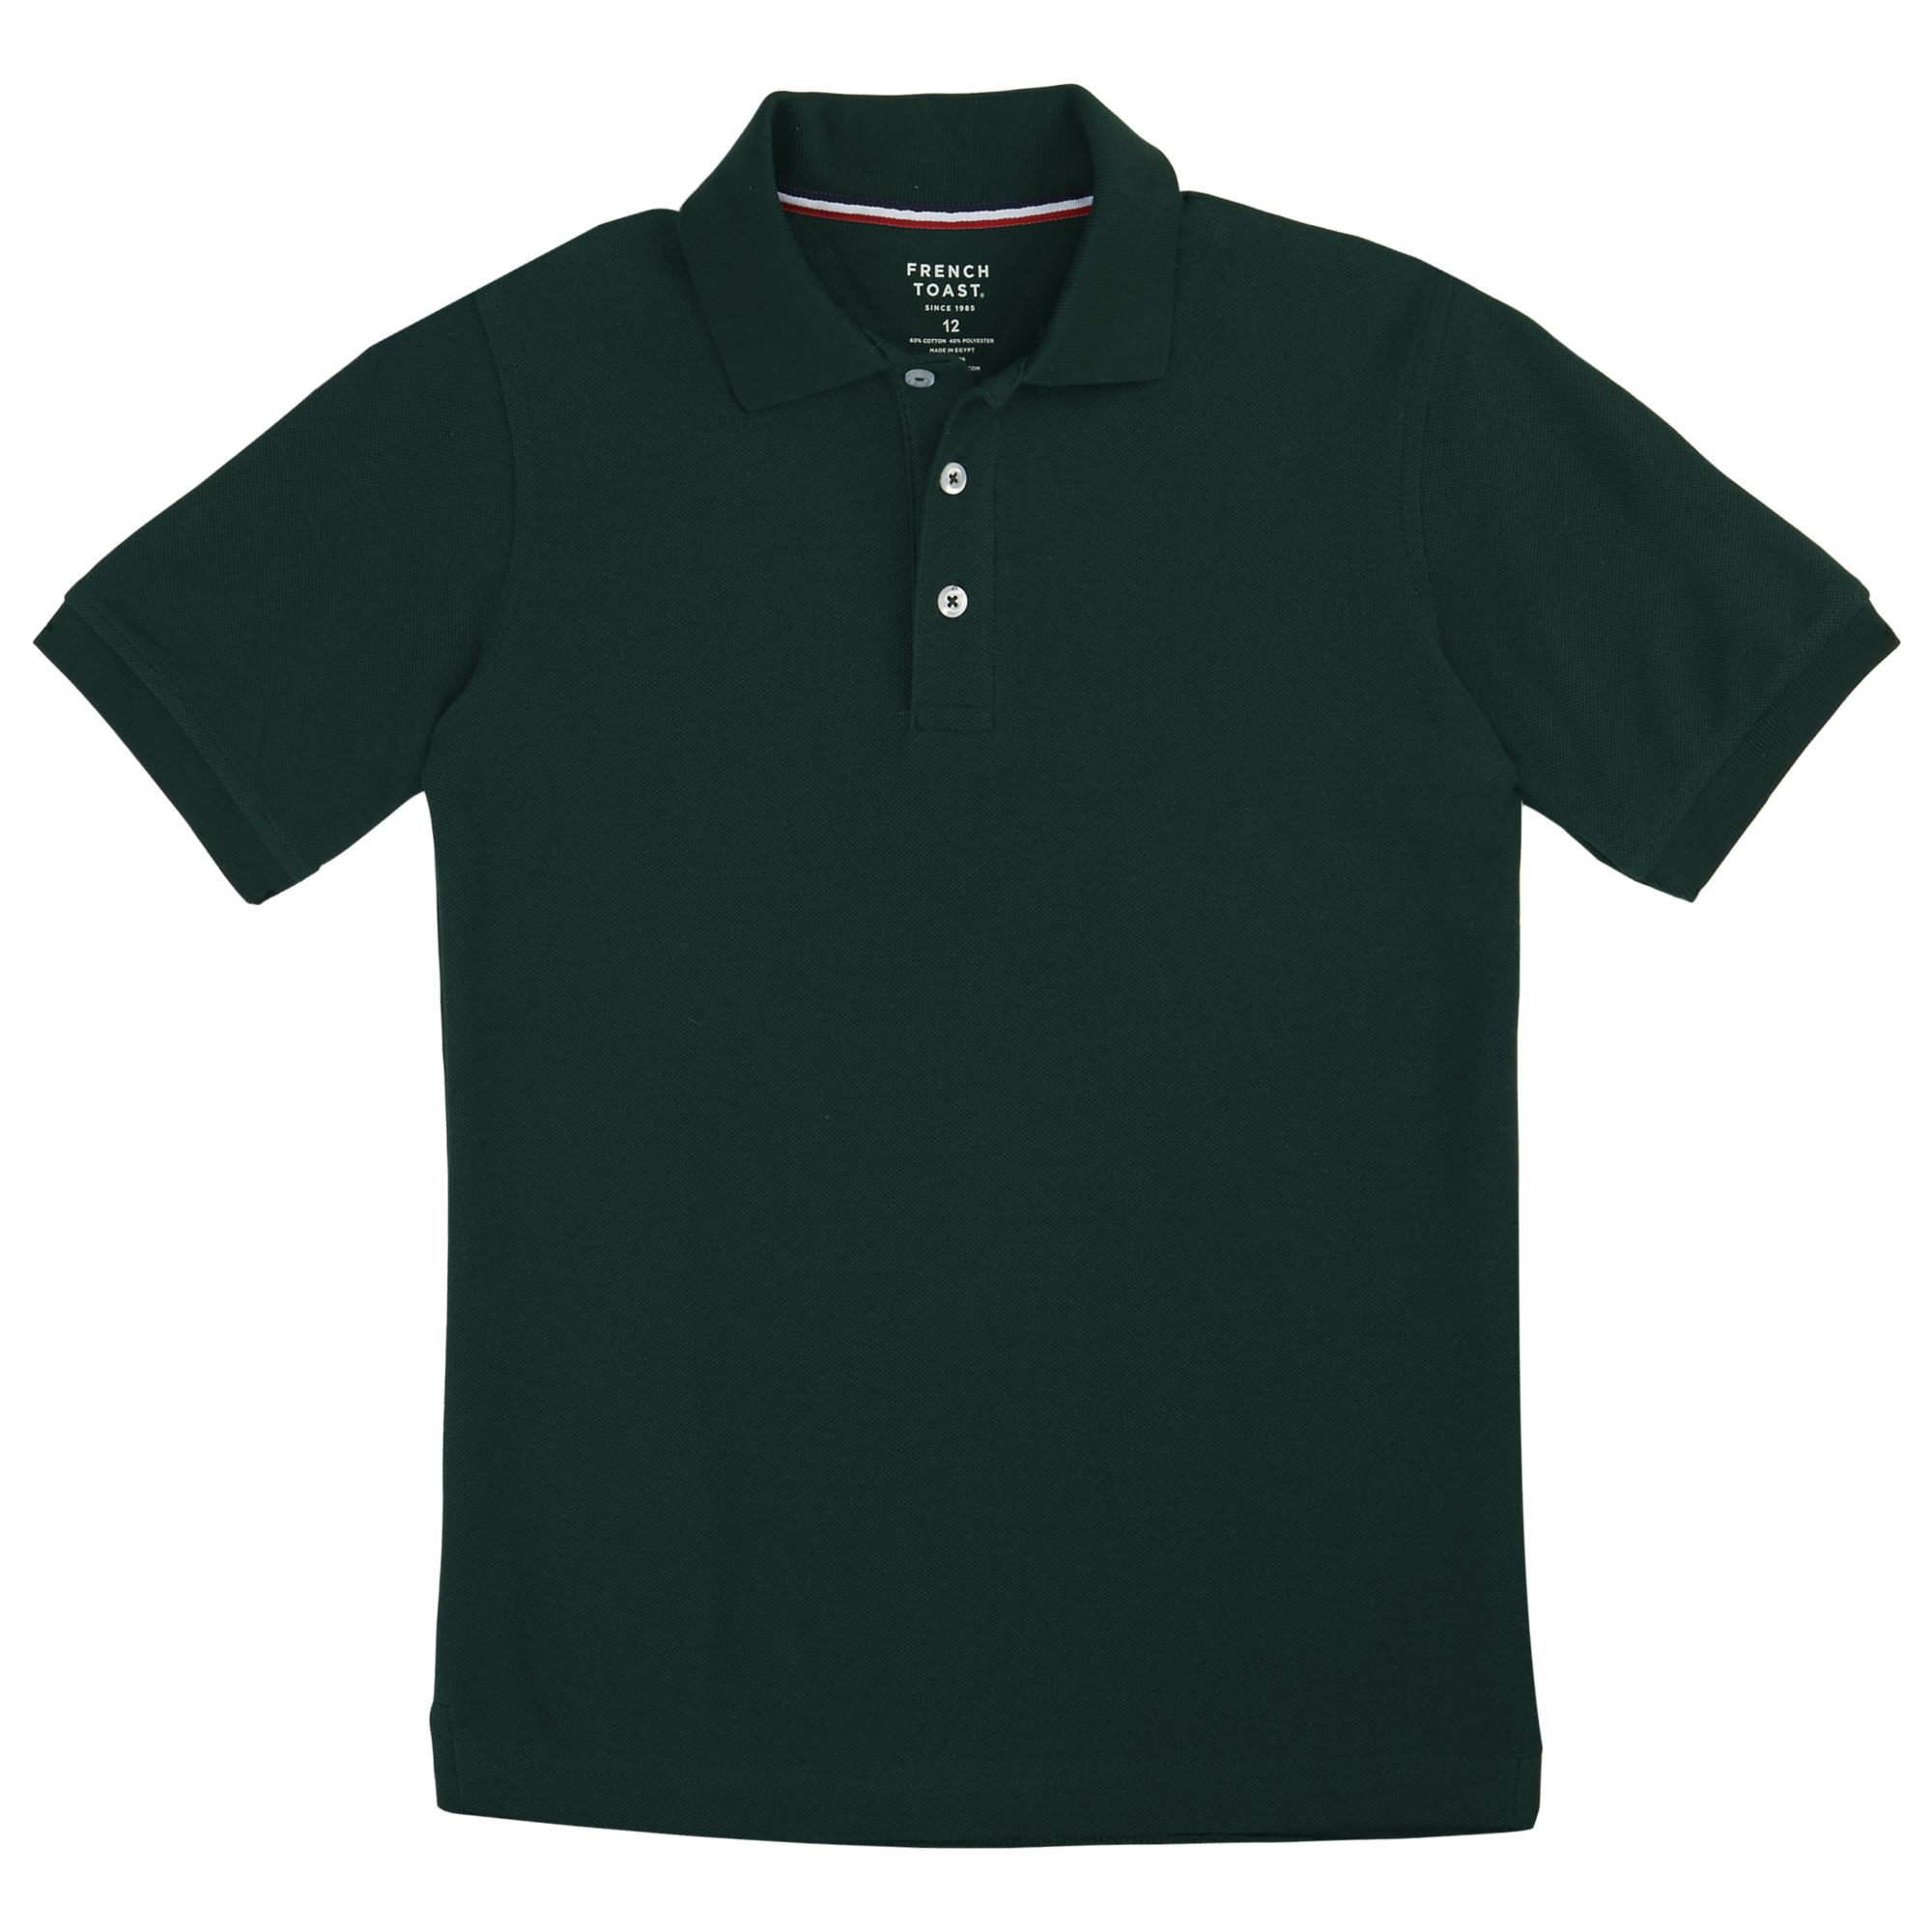 French Toast Boys Short Sleeve Pique Polo - image 1 of 2